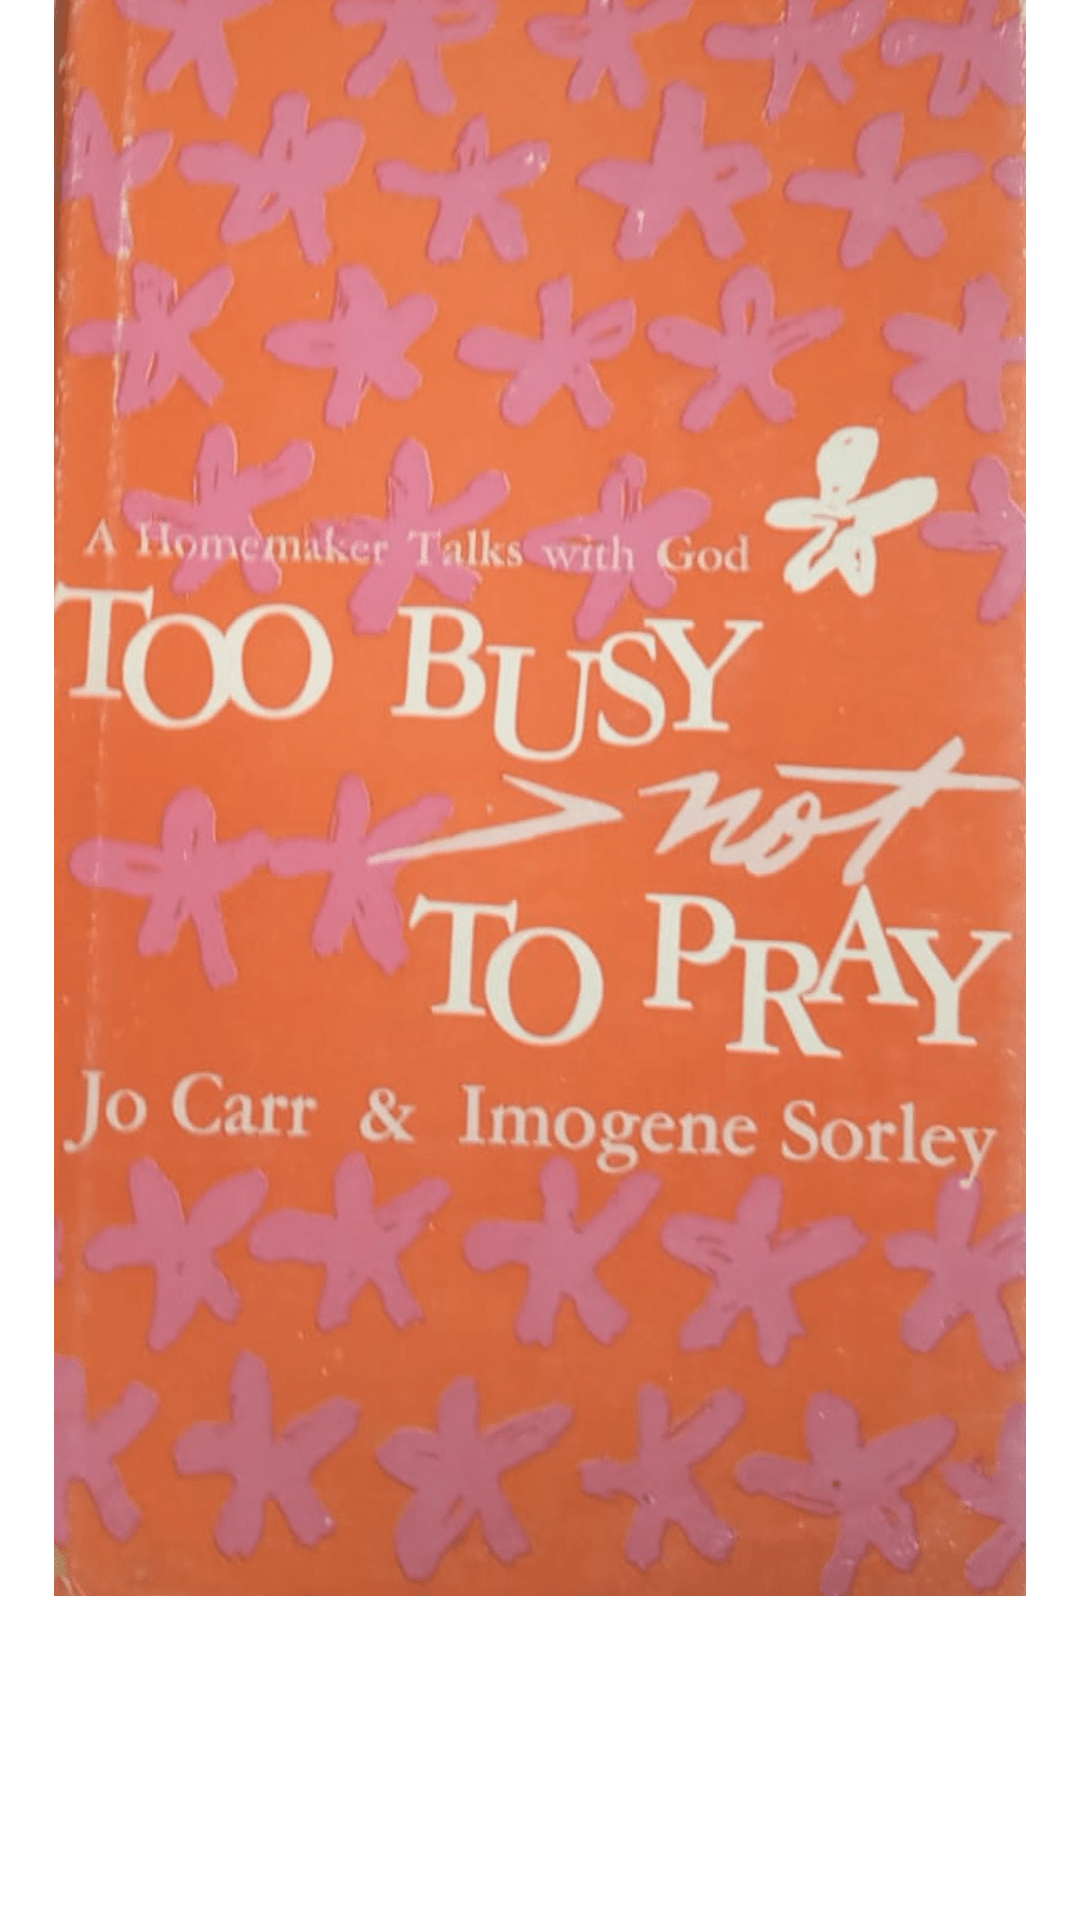 Too Busy Not To Pray by Jo Carr